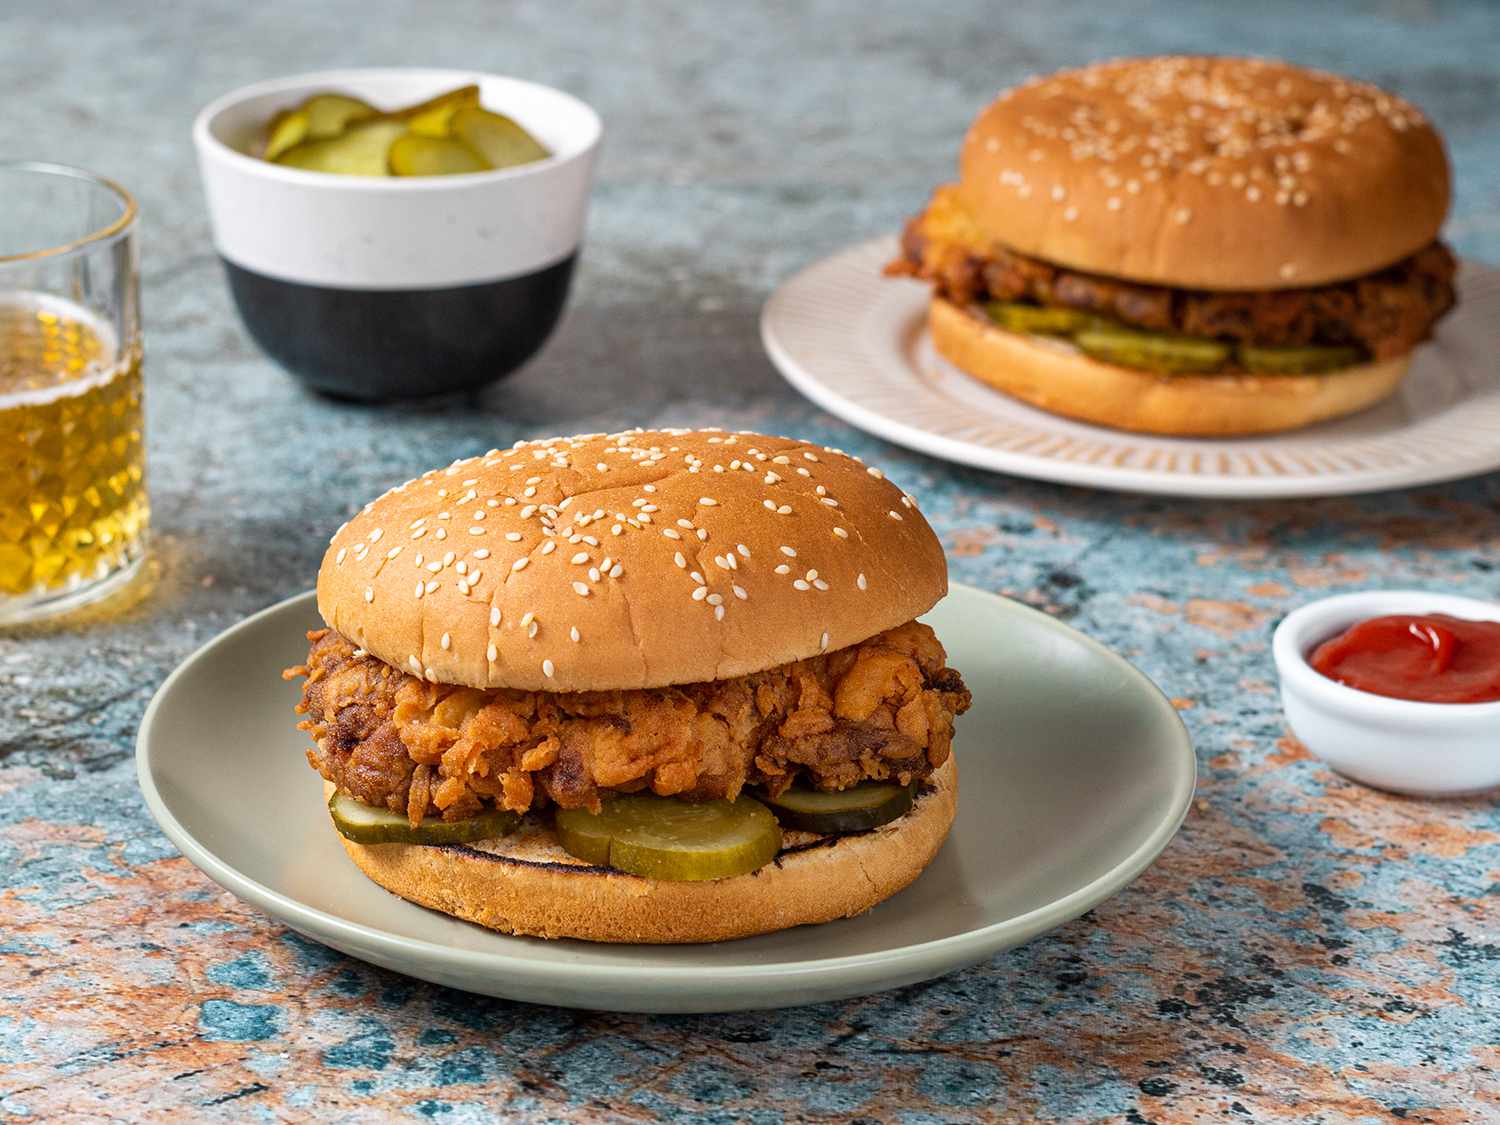 Two fried chicken sandwiches on ceramic plates.